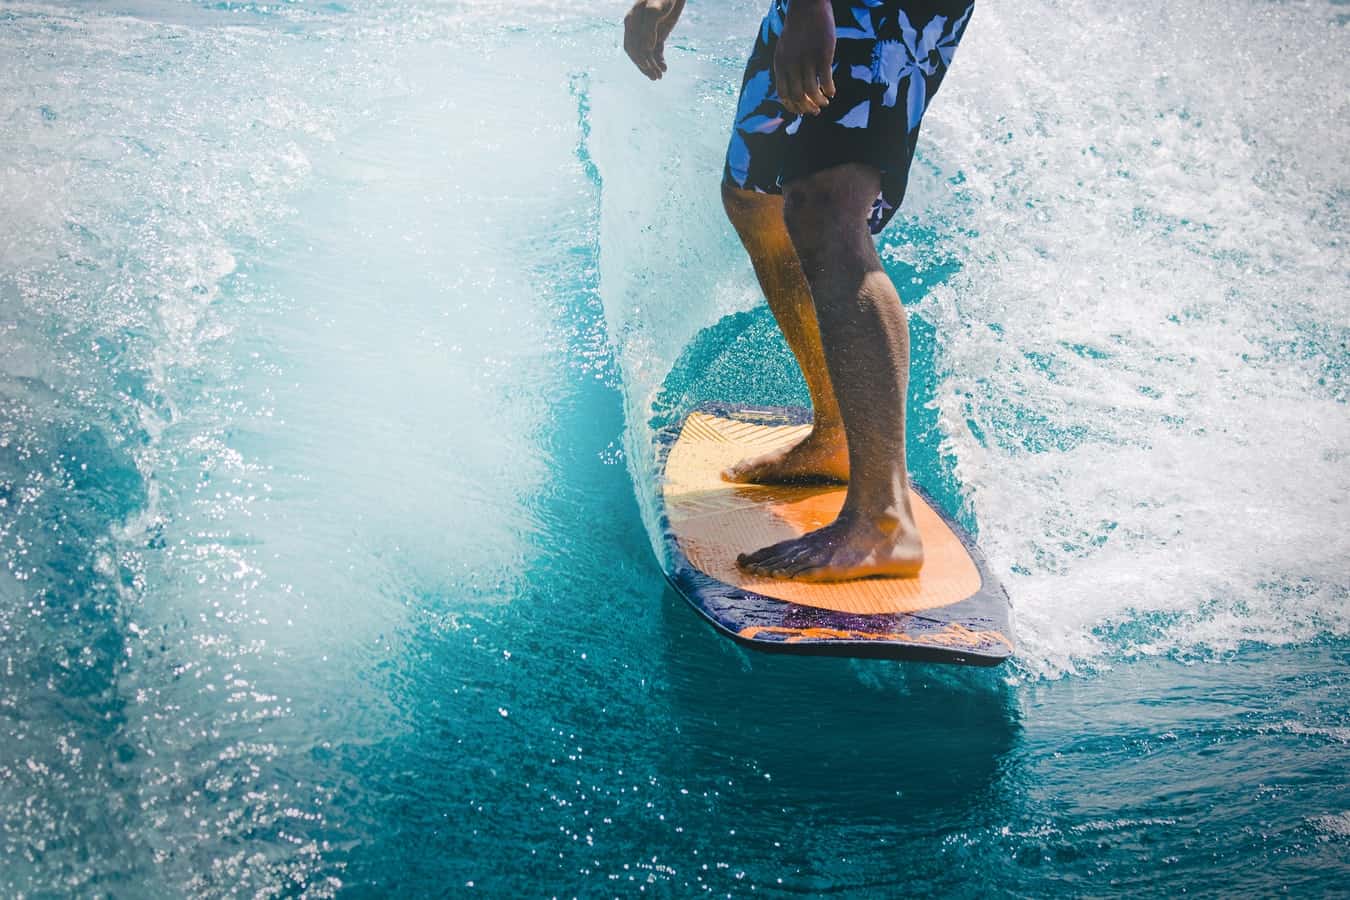 standing up while surfing